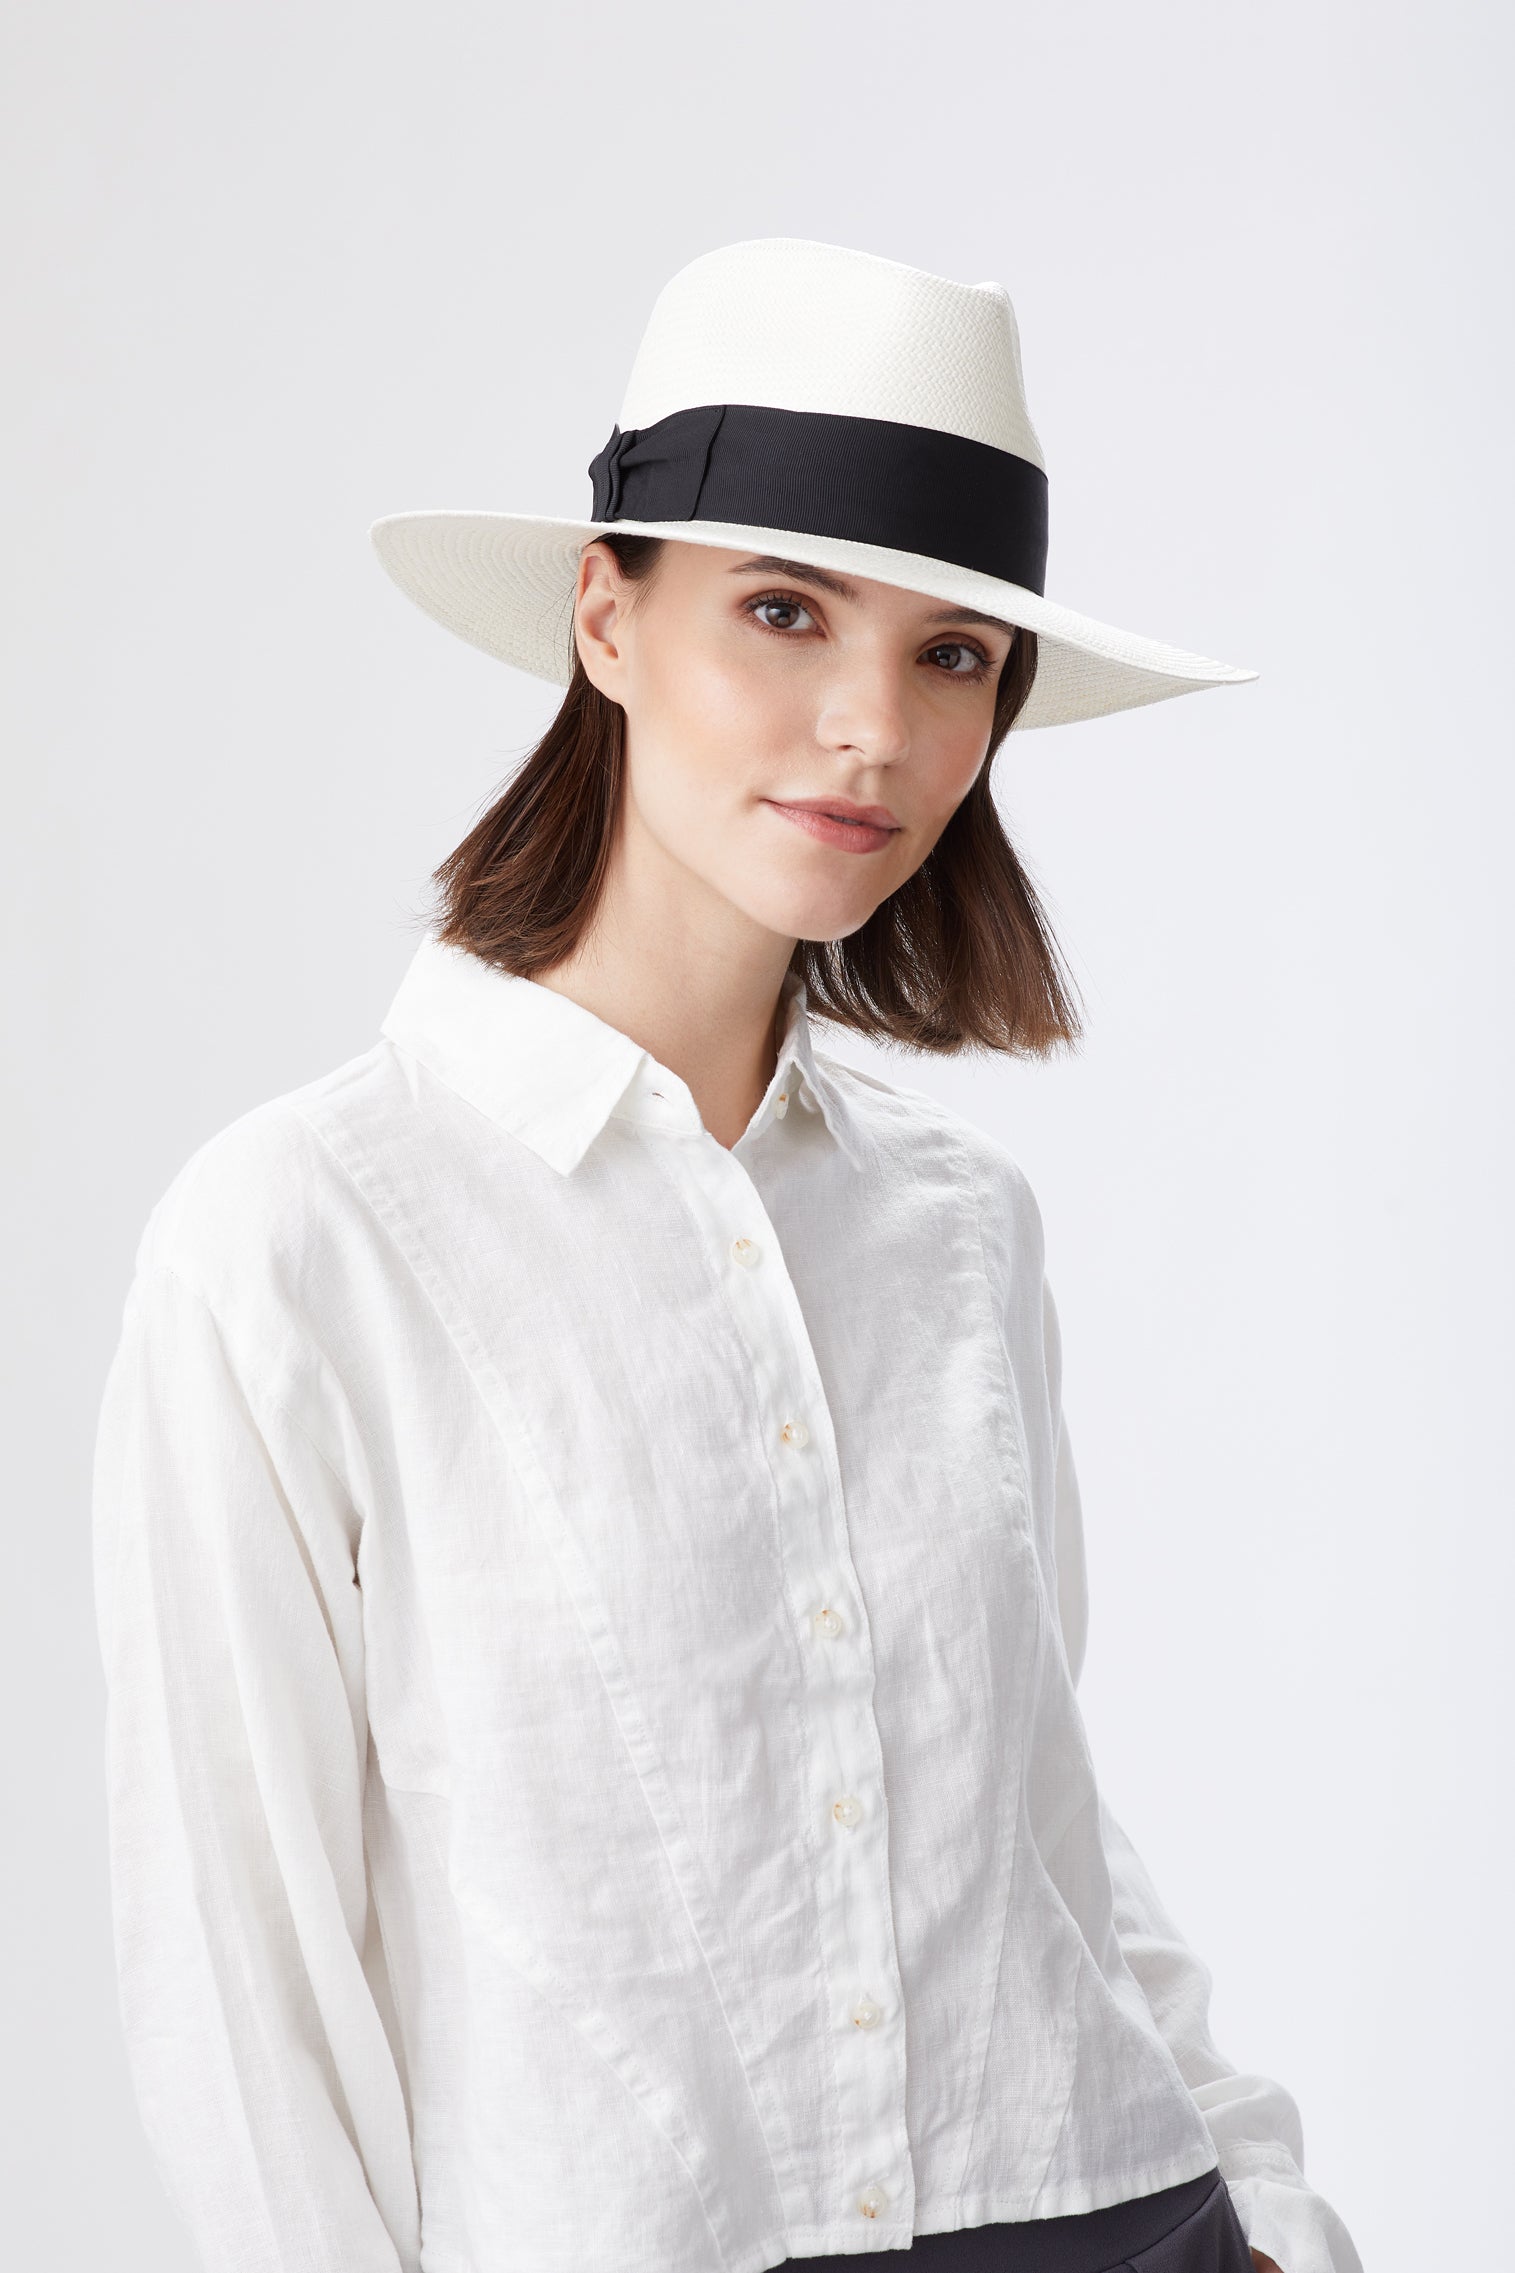 Peacehaven Panama - Panamas, Straw and Sun Hats for Women - Lock & Co. Hatters London UK